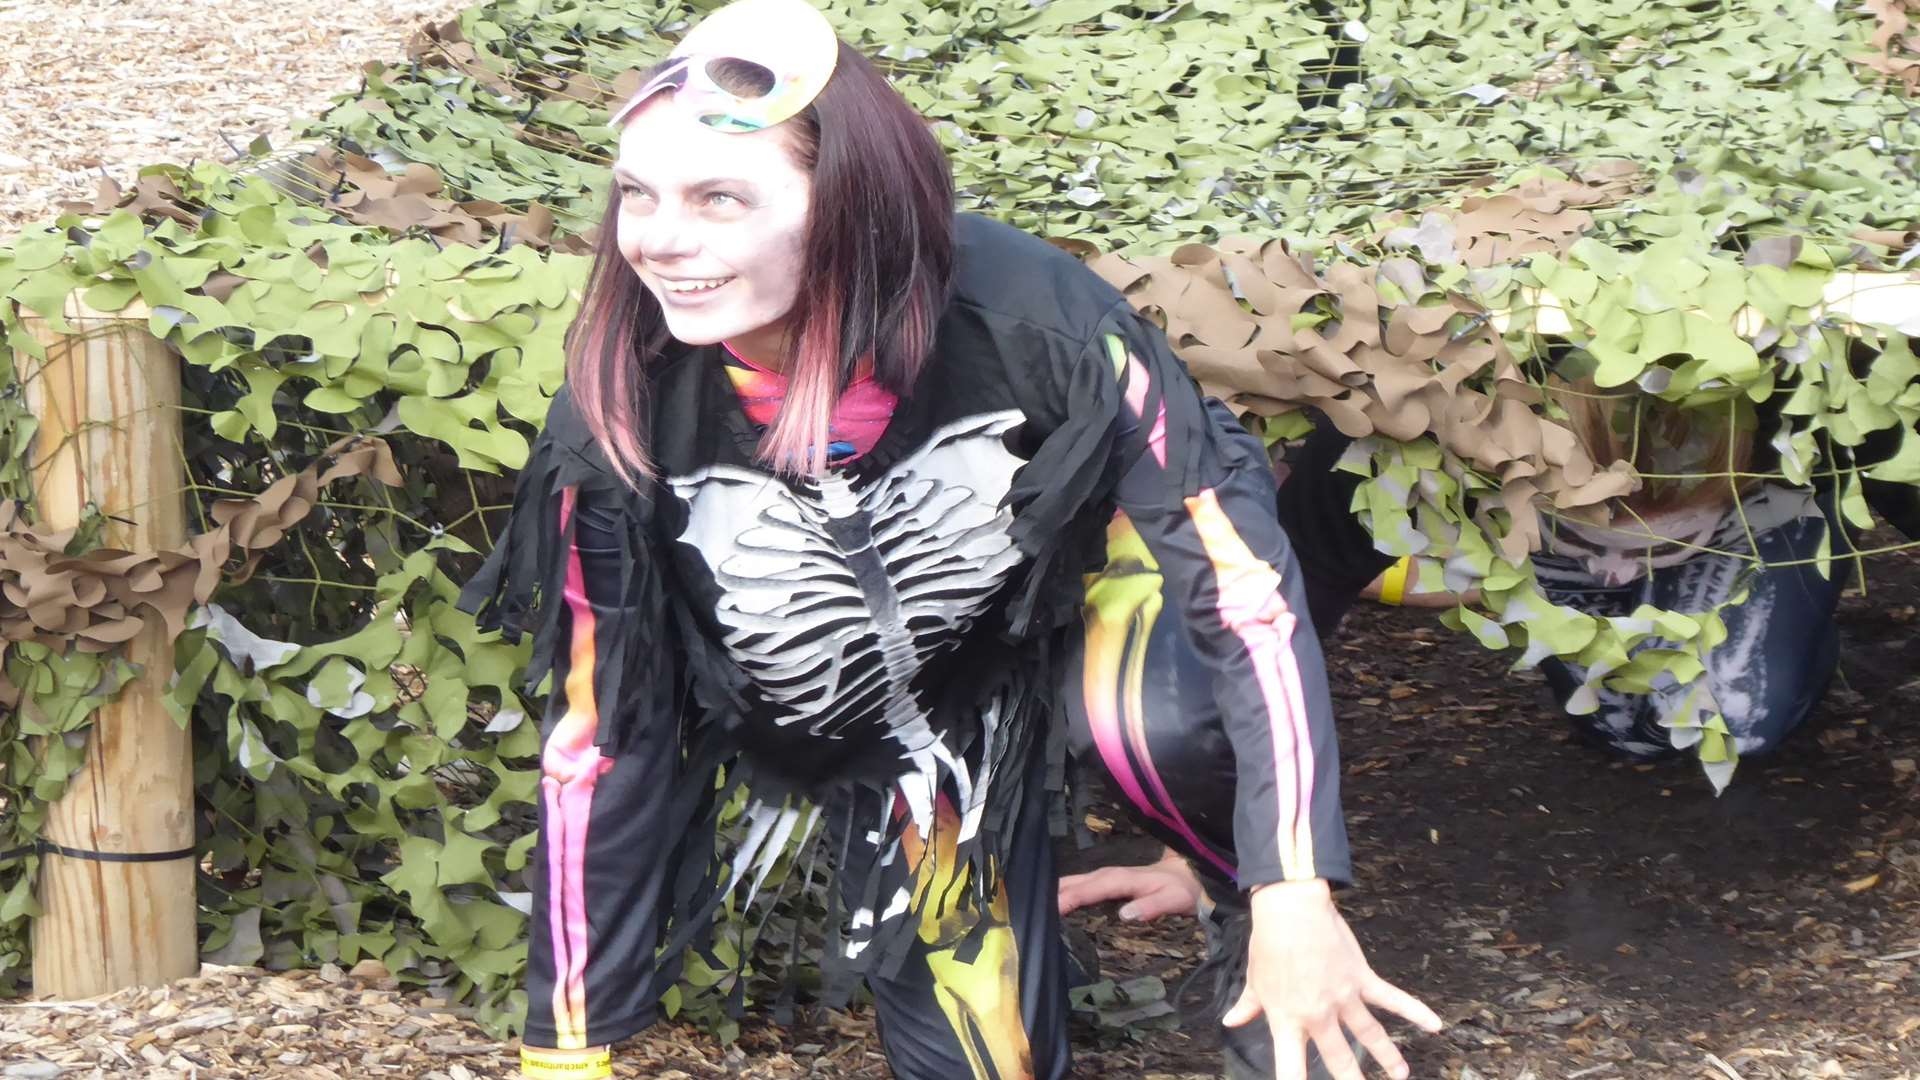 The Reckless Abandonment team donned skeleton outfits to raise funds for Fresh Visions at the KM Assault Course Challenge where 20 teams of six people raised £6,000 for 14 good causes.